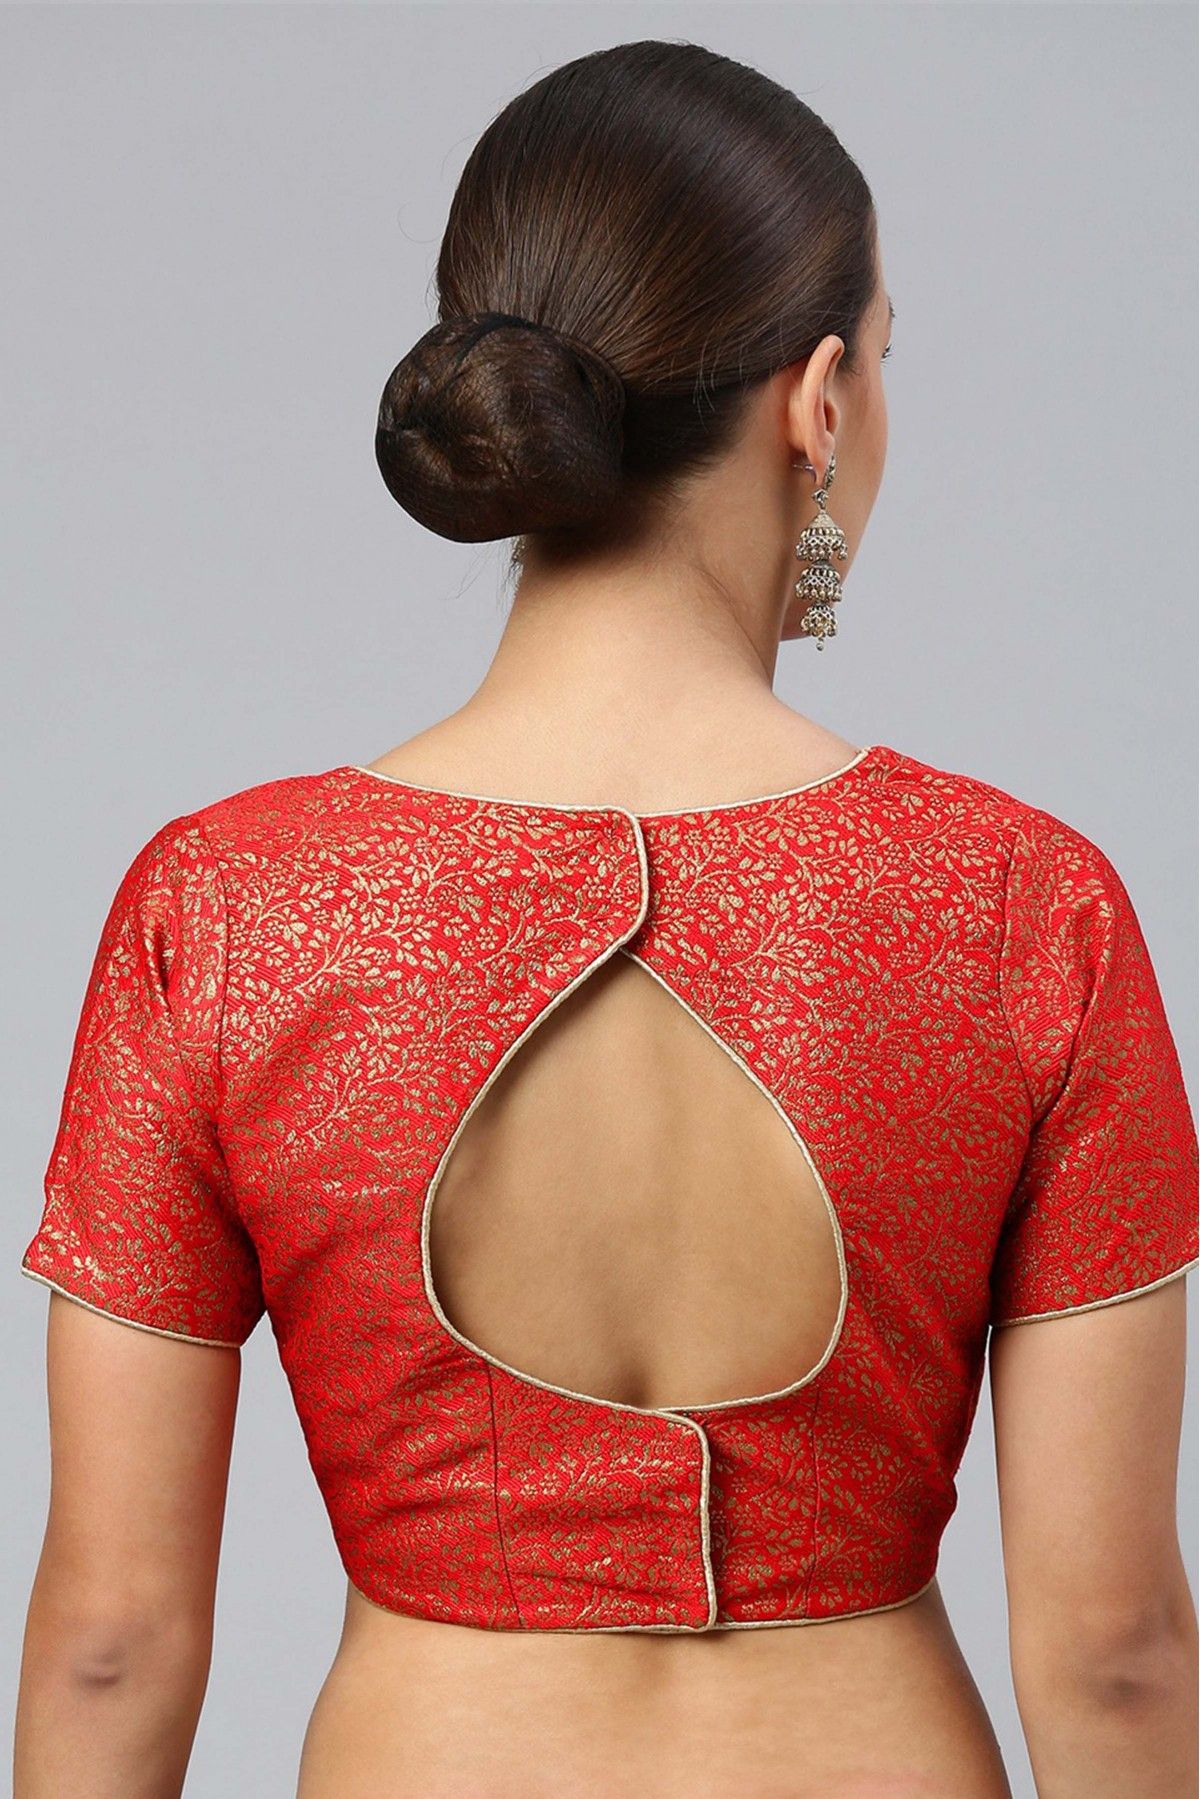 Is padded or non-padded better for my bridal blouse, blog